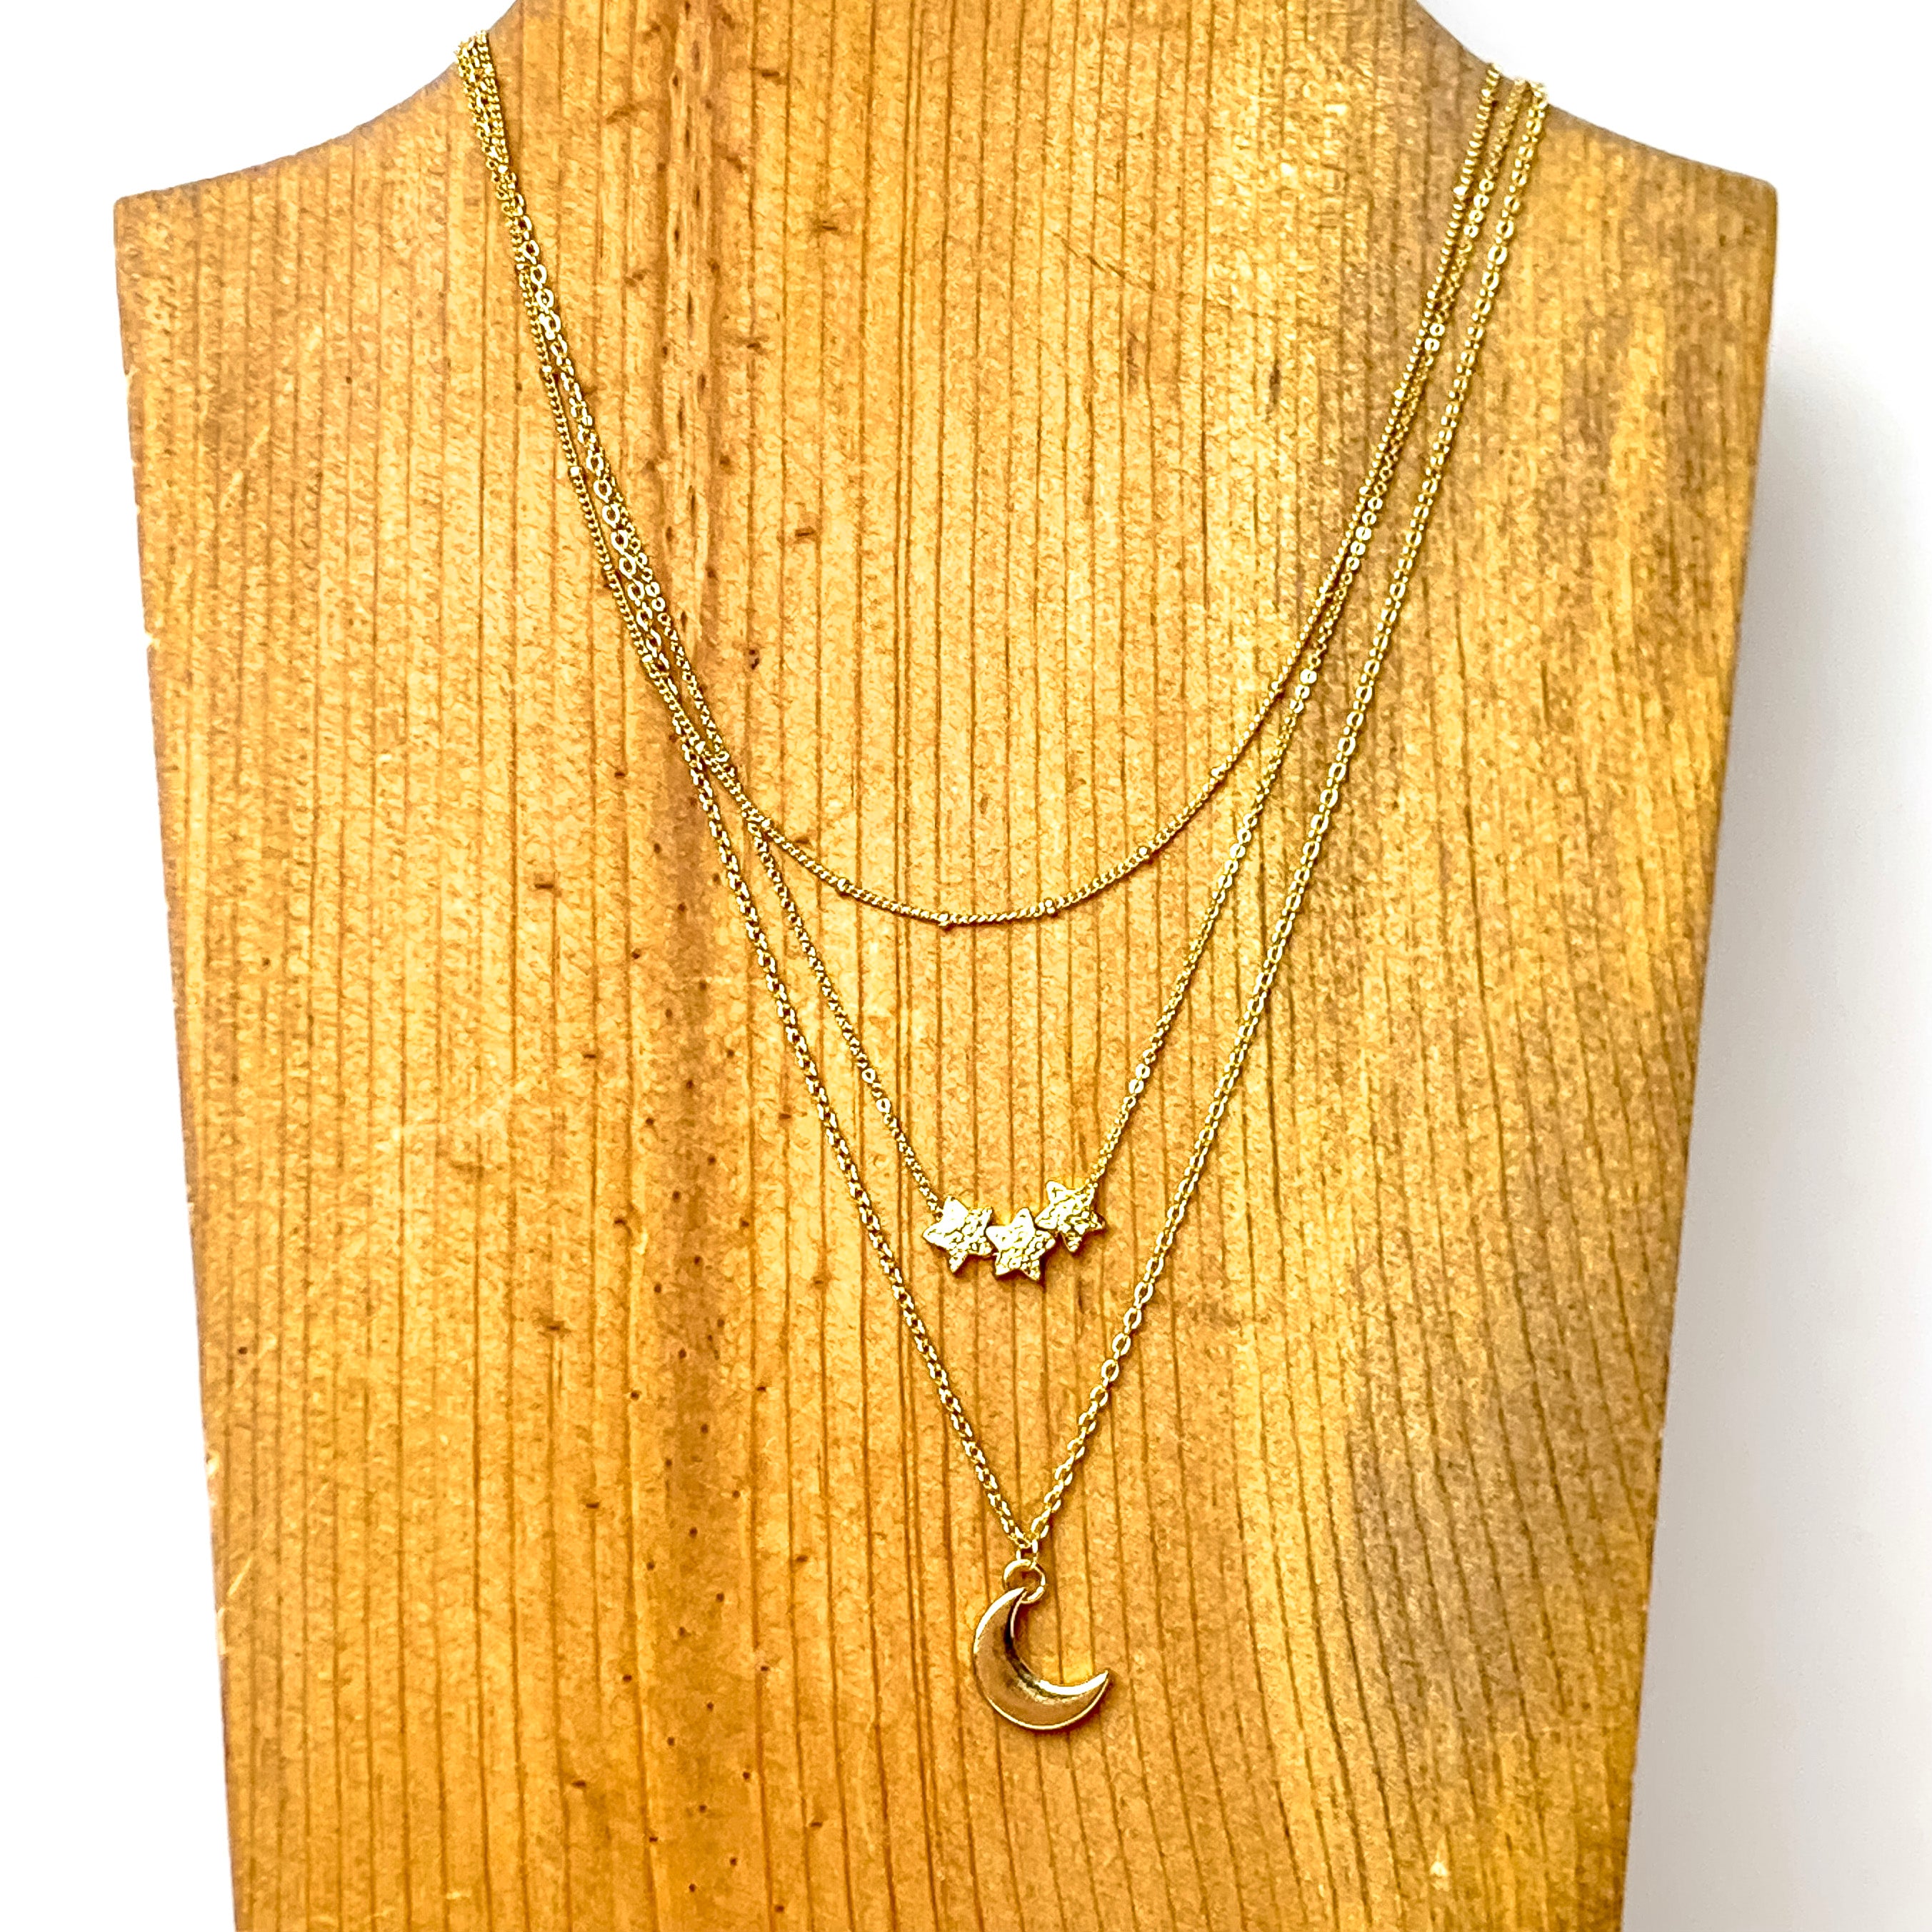 Gold Starry Night Necklace Trio - Giddy Up Glamour Boutique